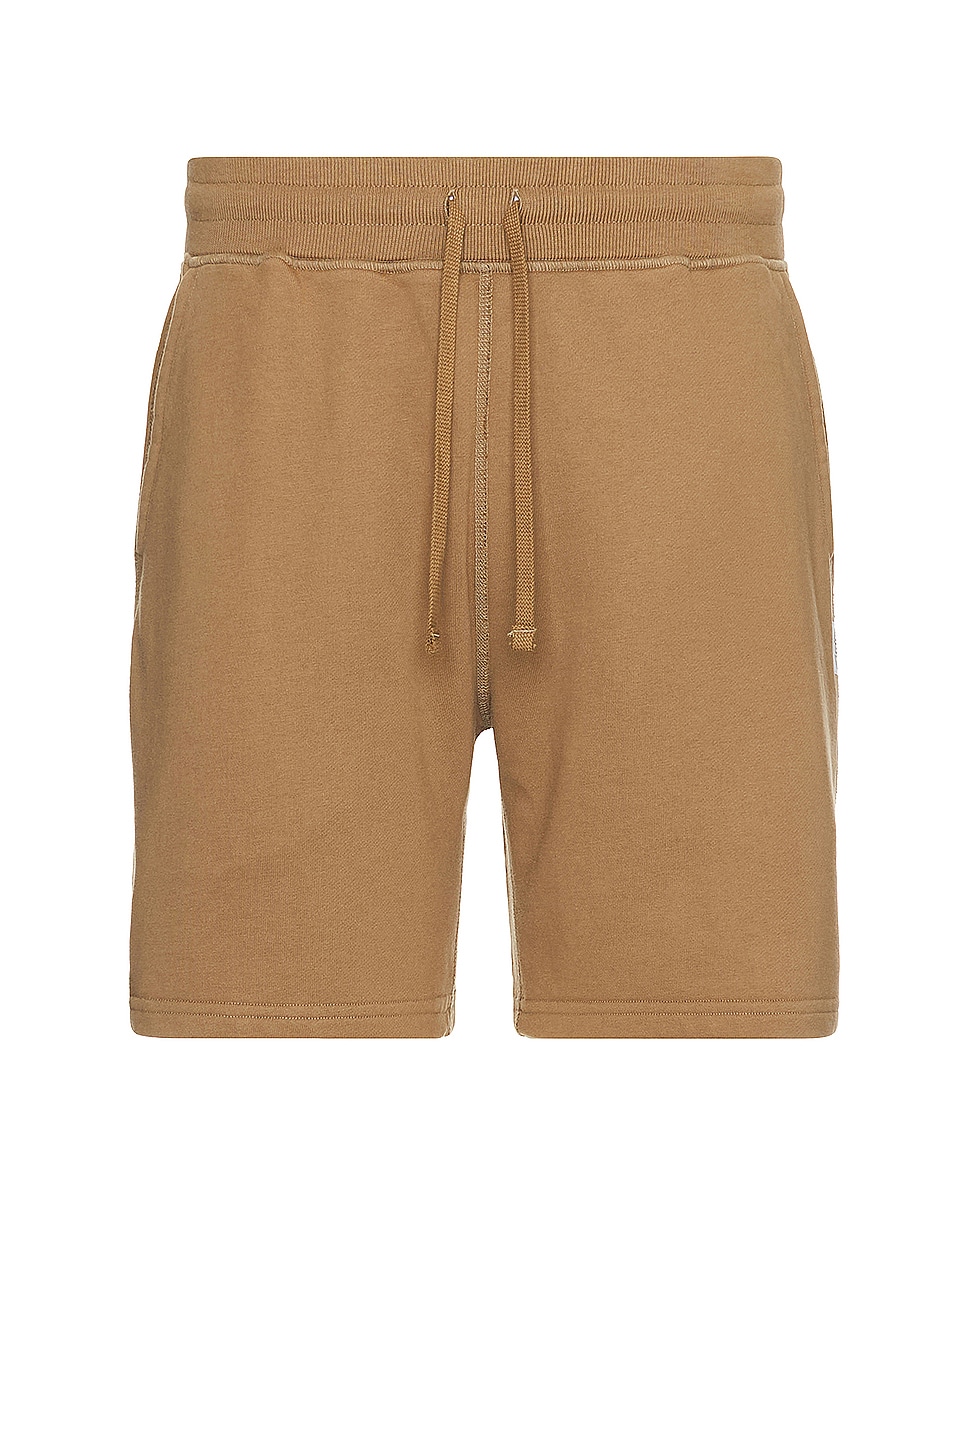 Image 1 of Reigning Champ Midweight Terry Sweatshort 6" in Clary